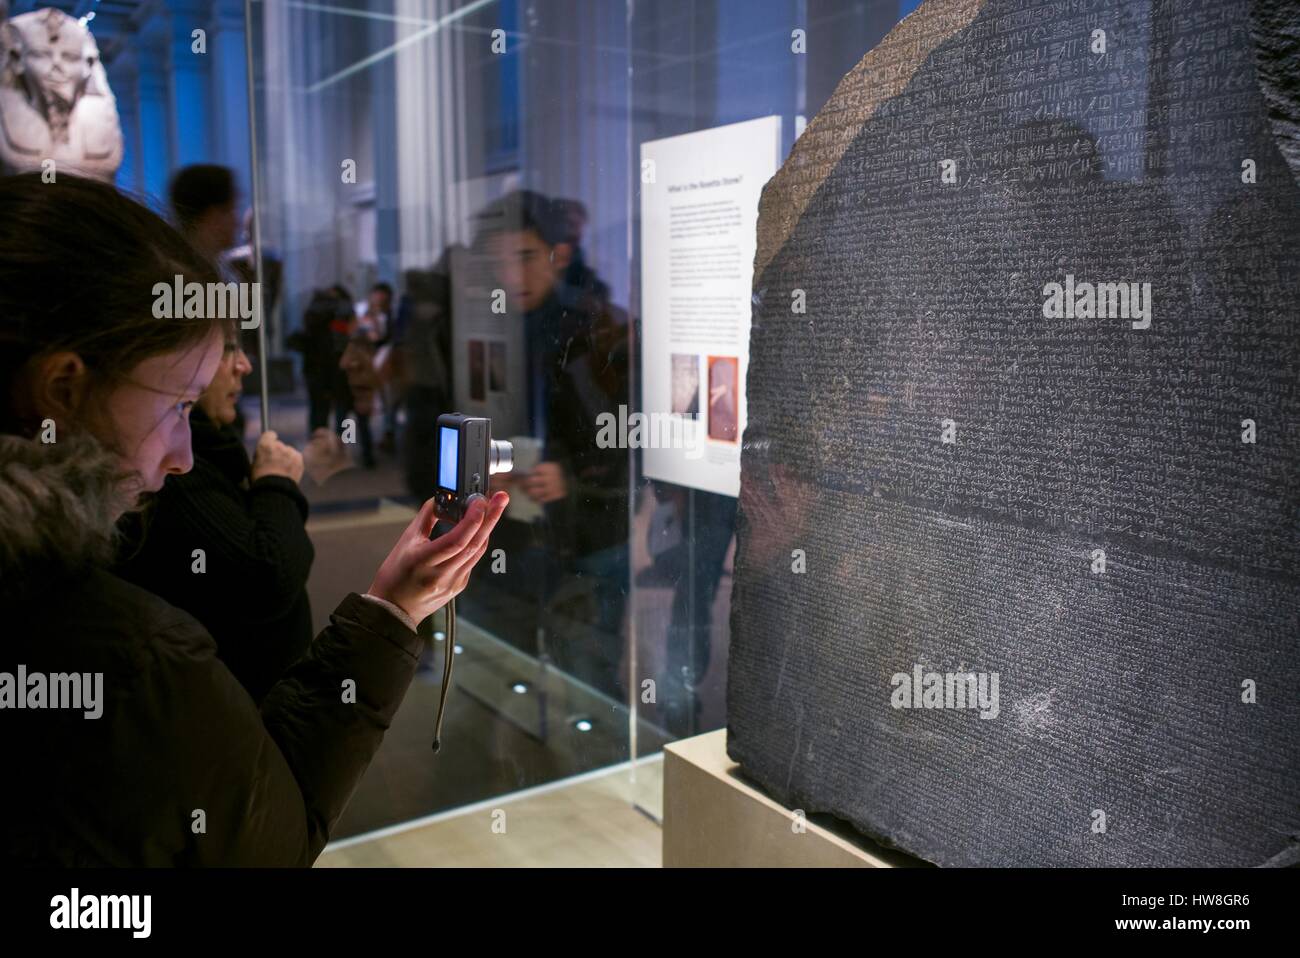 England, London, Bloomsbury, The British Museum, Egyptian Room, The Rosetta Stone, its discovery allowed the deciphering of the ancient Egyptian alphabet, being photographed by cell phone Stock Photo